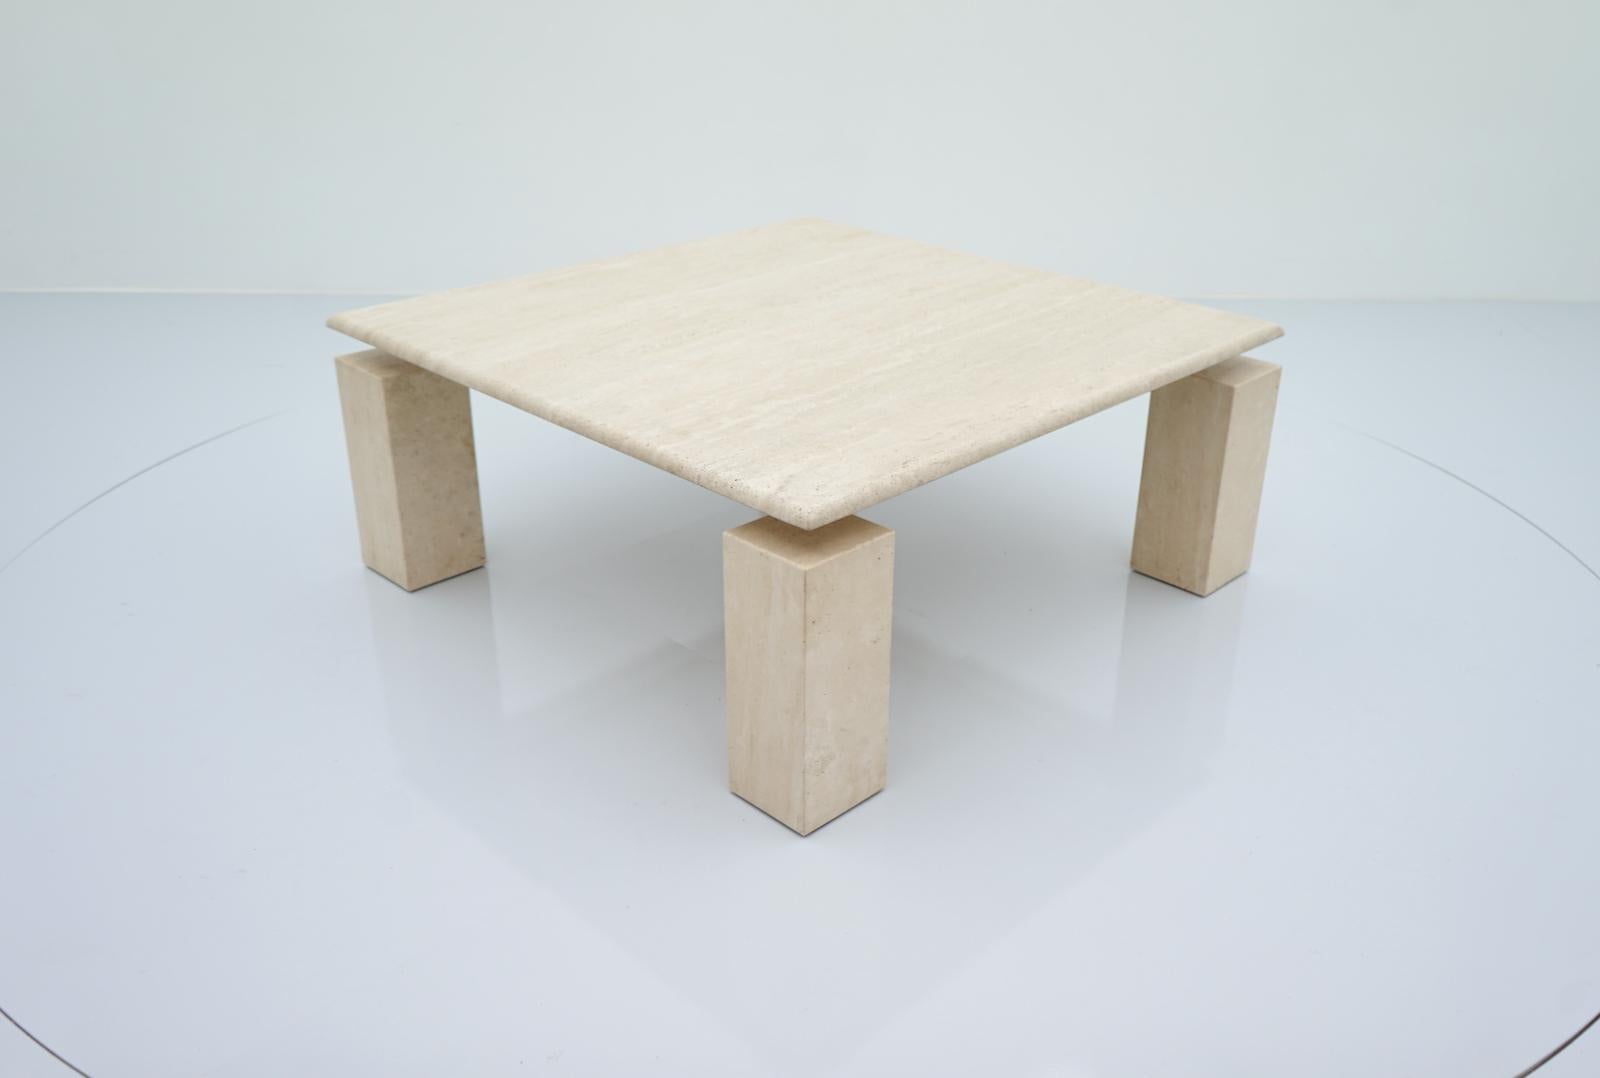 Square Travertine and brass Coffee Table with a floating table top, Italy 1970s. 
Very good condition.
Details

Creator: unknown
Period: 1970s
Color: beige
Style: Mid-Century Modern
Place of Origin: Italy
Dimensions: Height: 16.33 in. (41,5 cm)